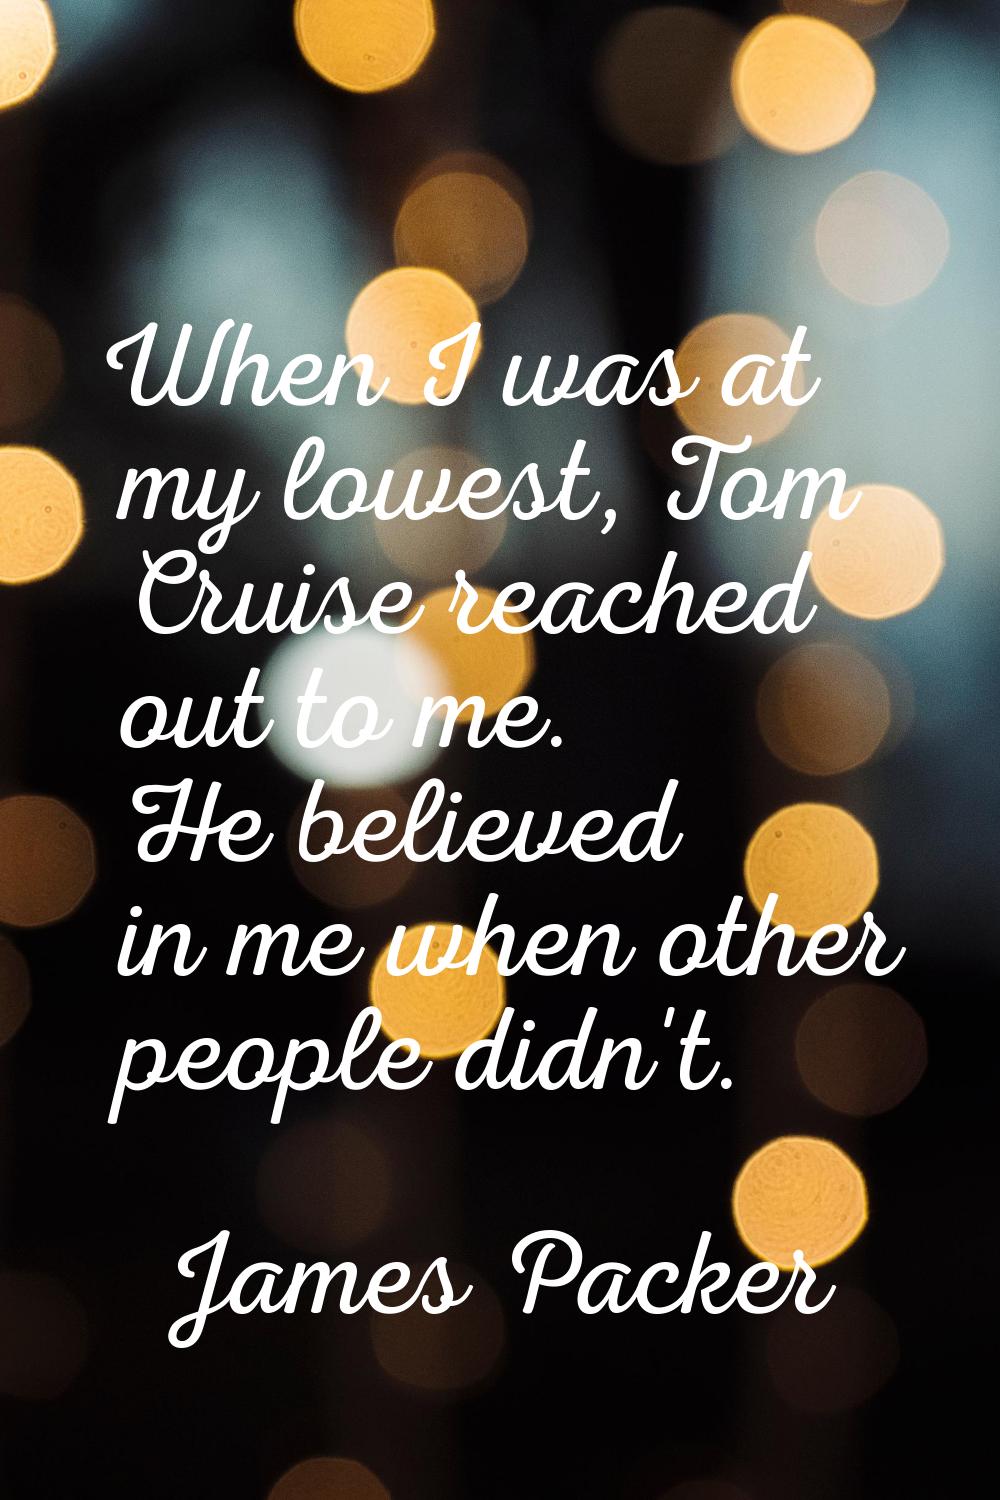 When I was at my lowest, Tom Cruise reached out to me. He believed in me when other people didn't.